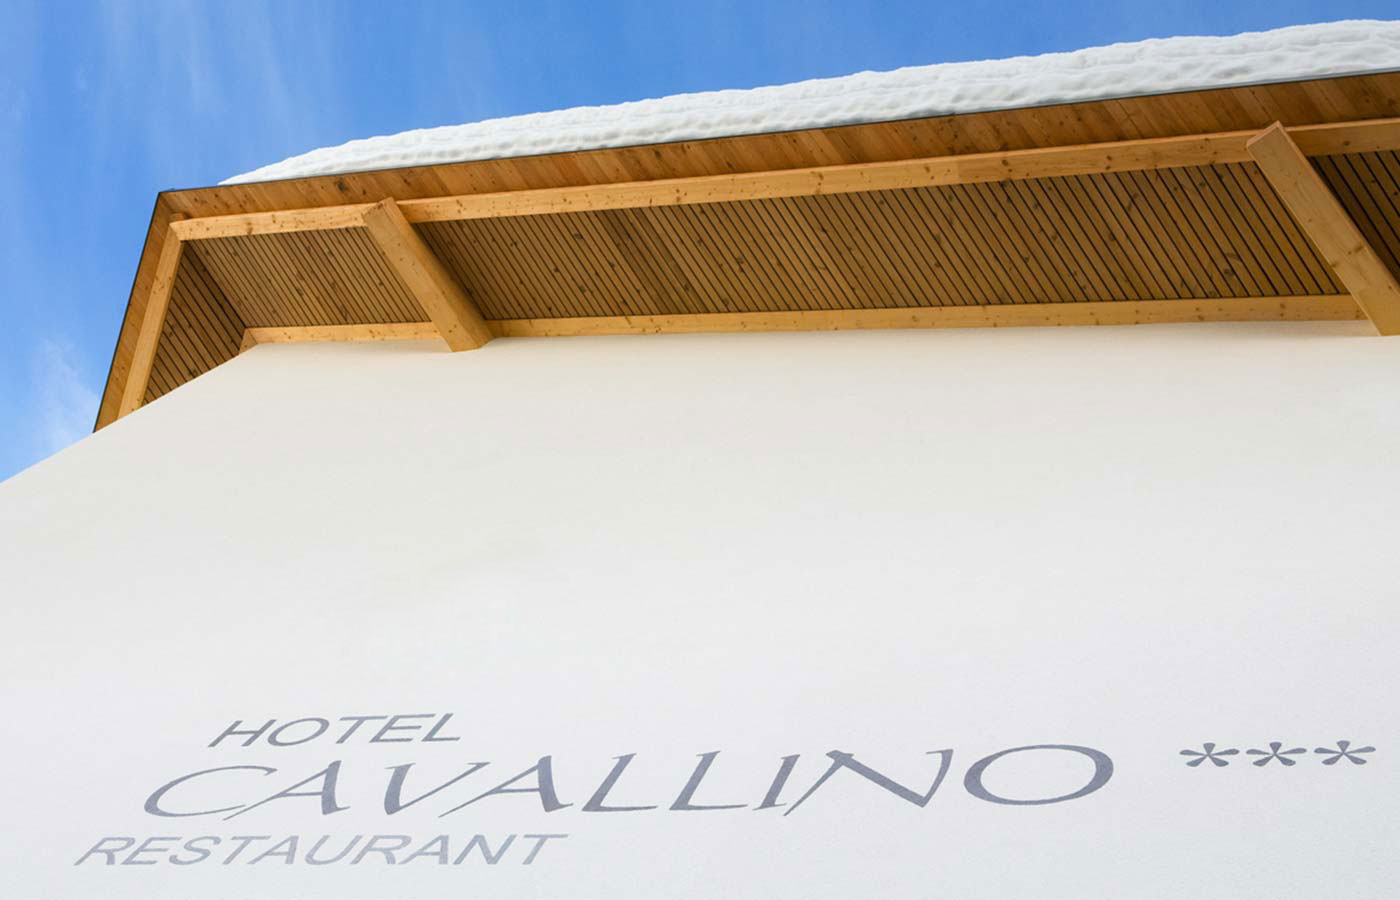 Writing 'Hotel Cavallino' on the hotel front